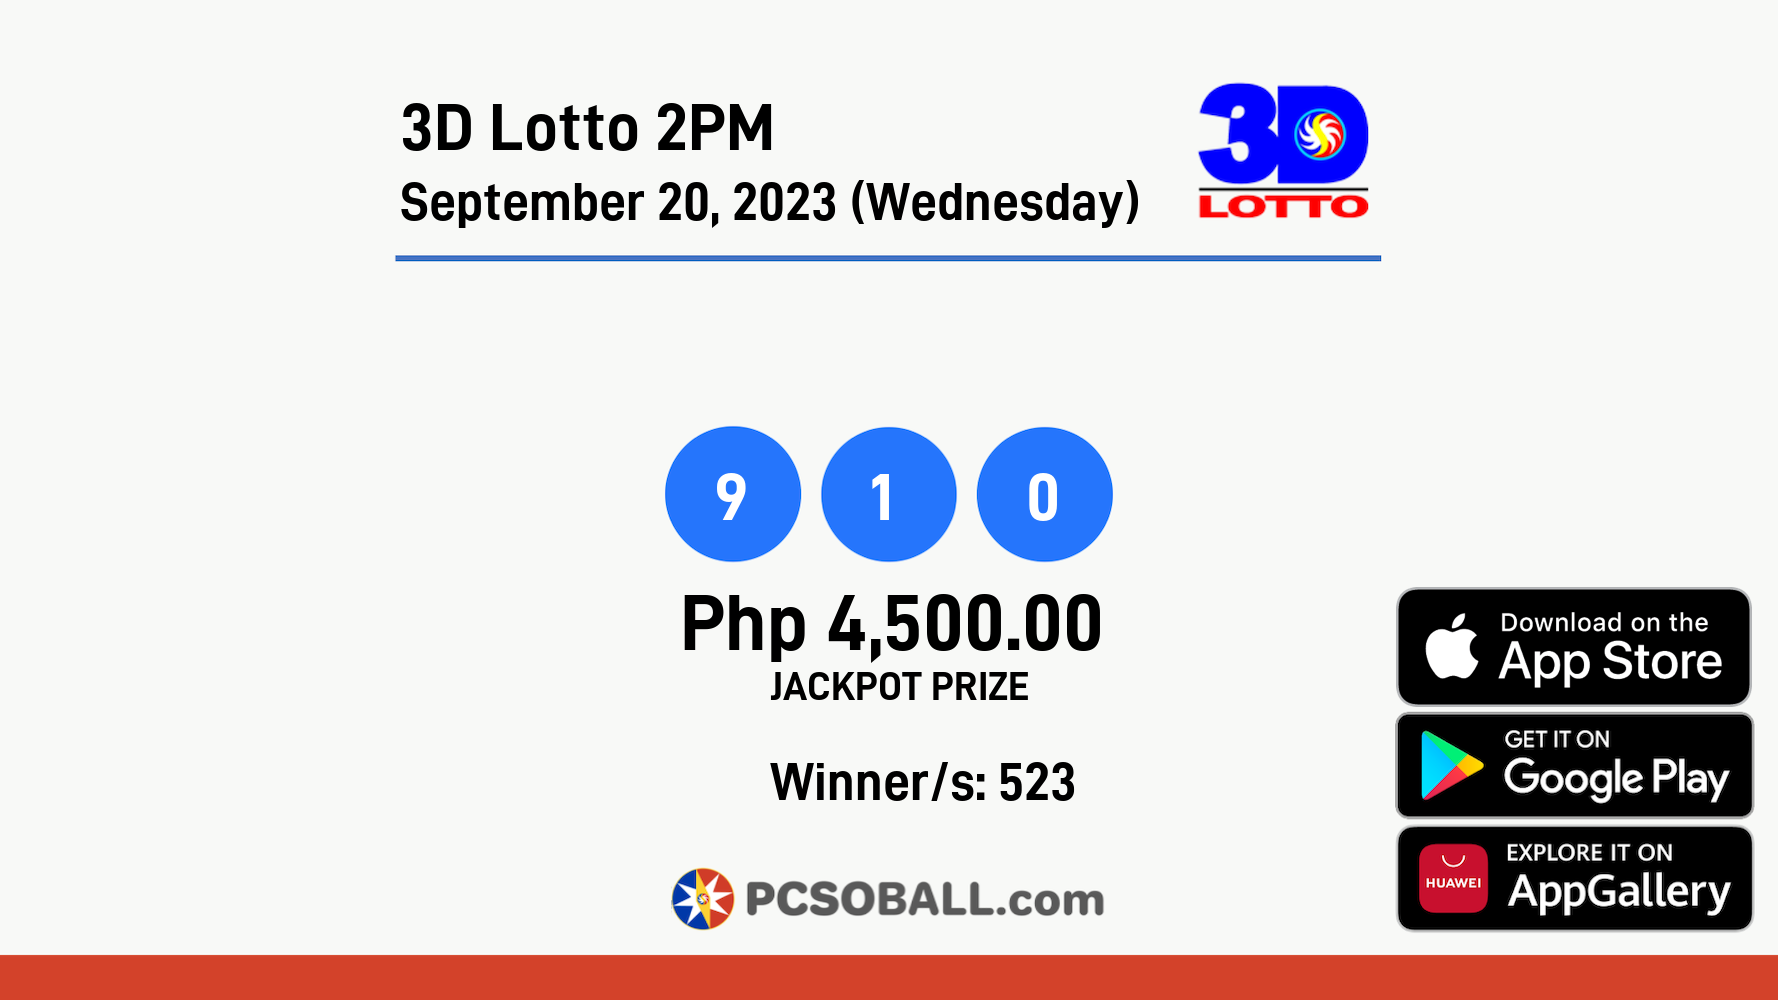 3D Lotto 2PM September 20, 2023 (Wednesday) Result